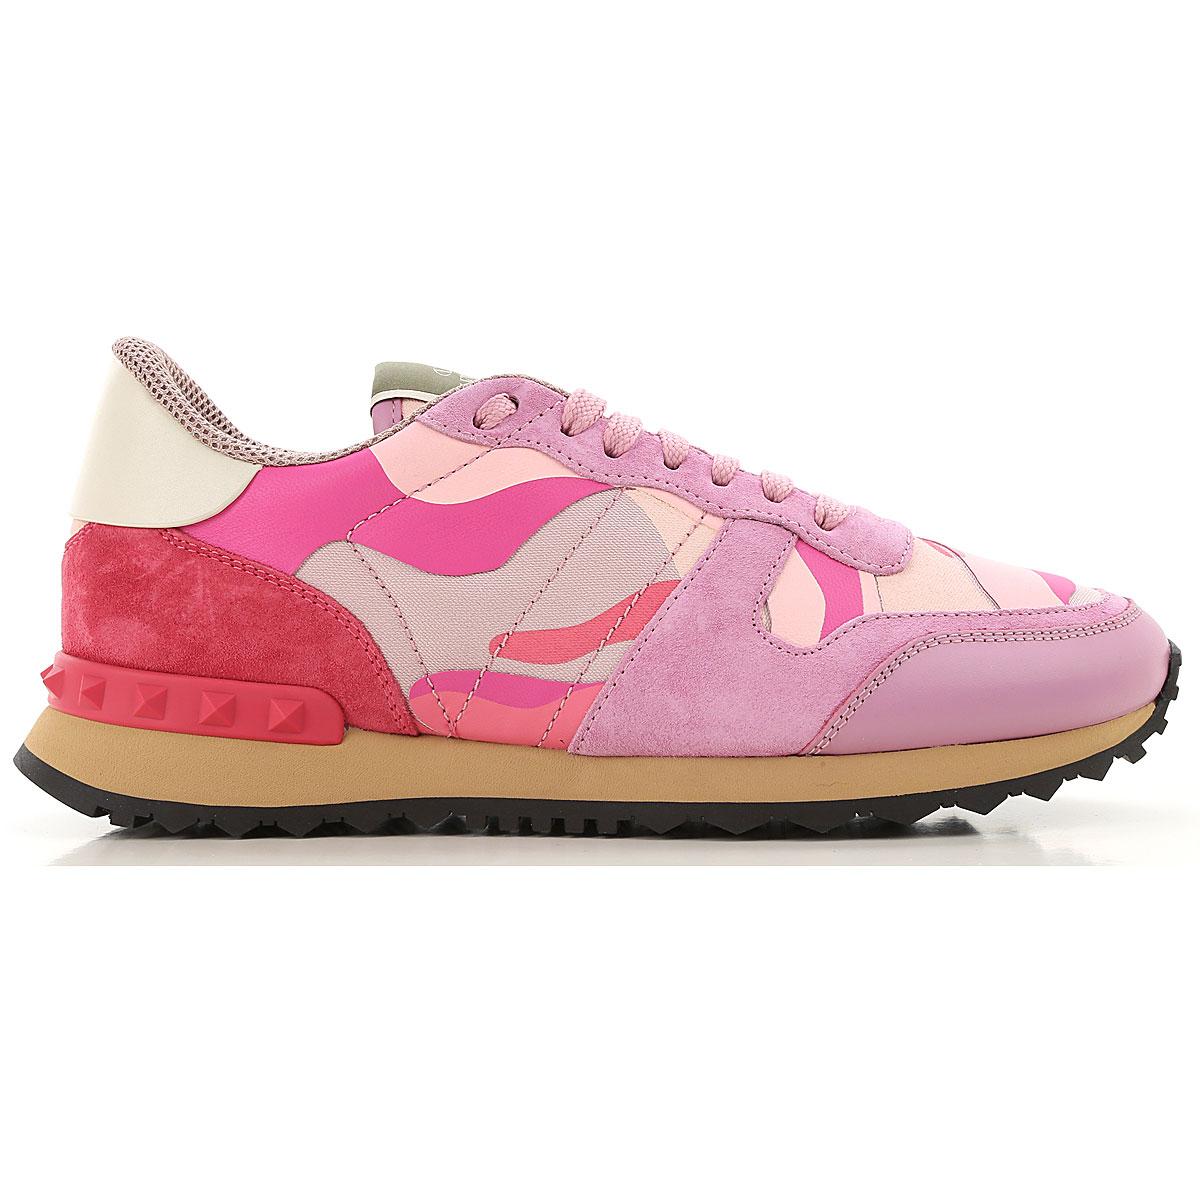 Valentino Sneakers For Women On Sale in Hot Pink (Pink) - Lyst